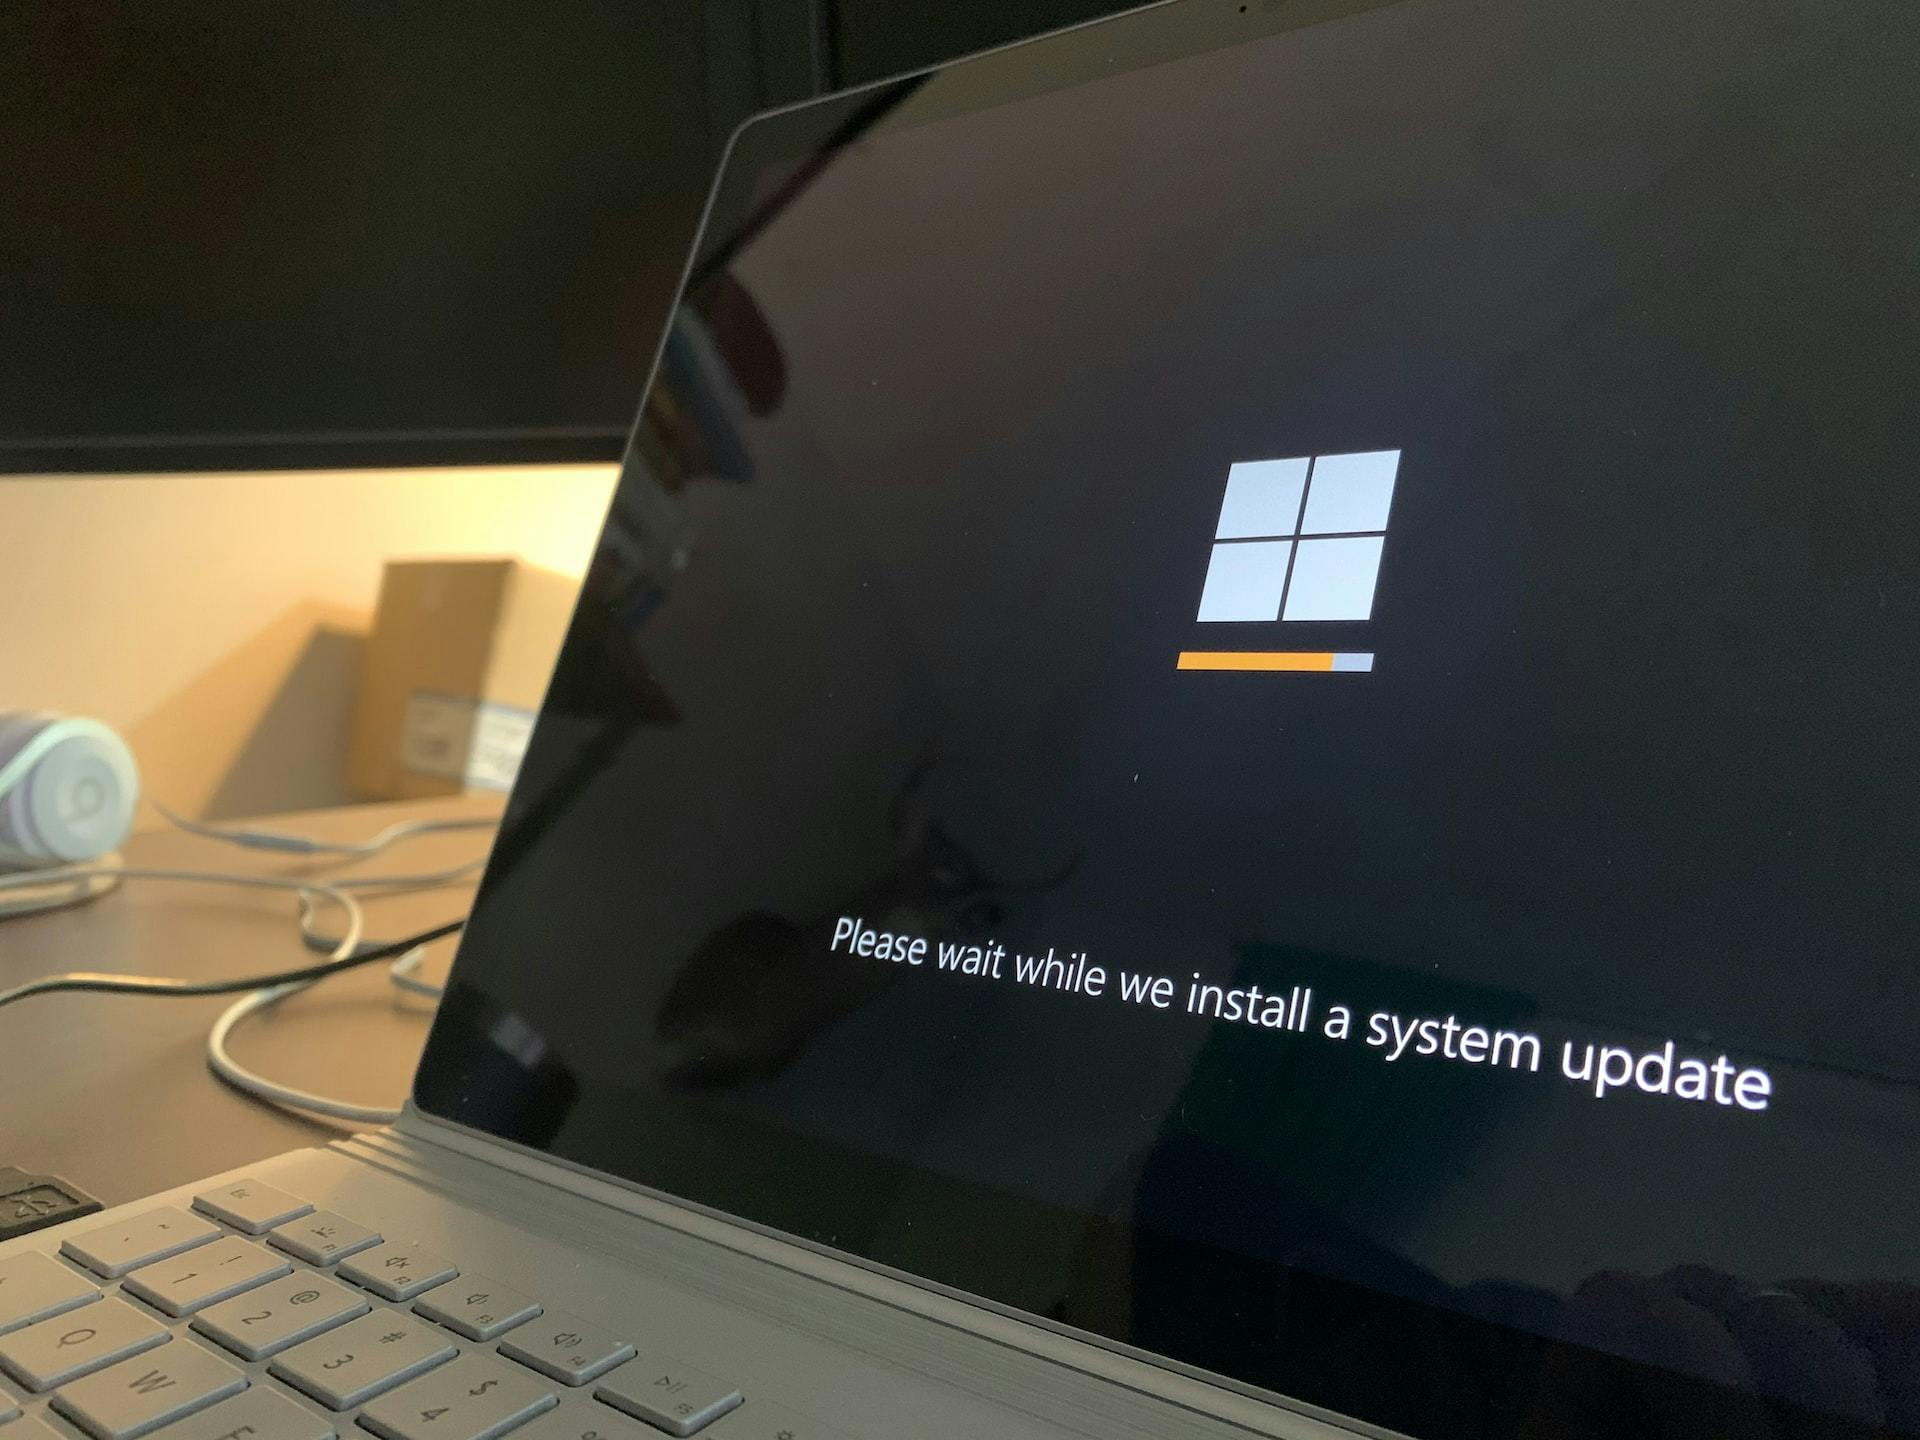 A laptop PC displays the Windows log and the message "Please wait while we install a system update"